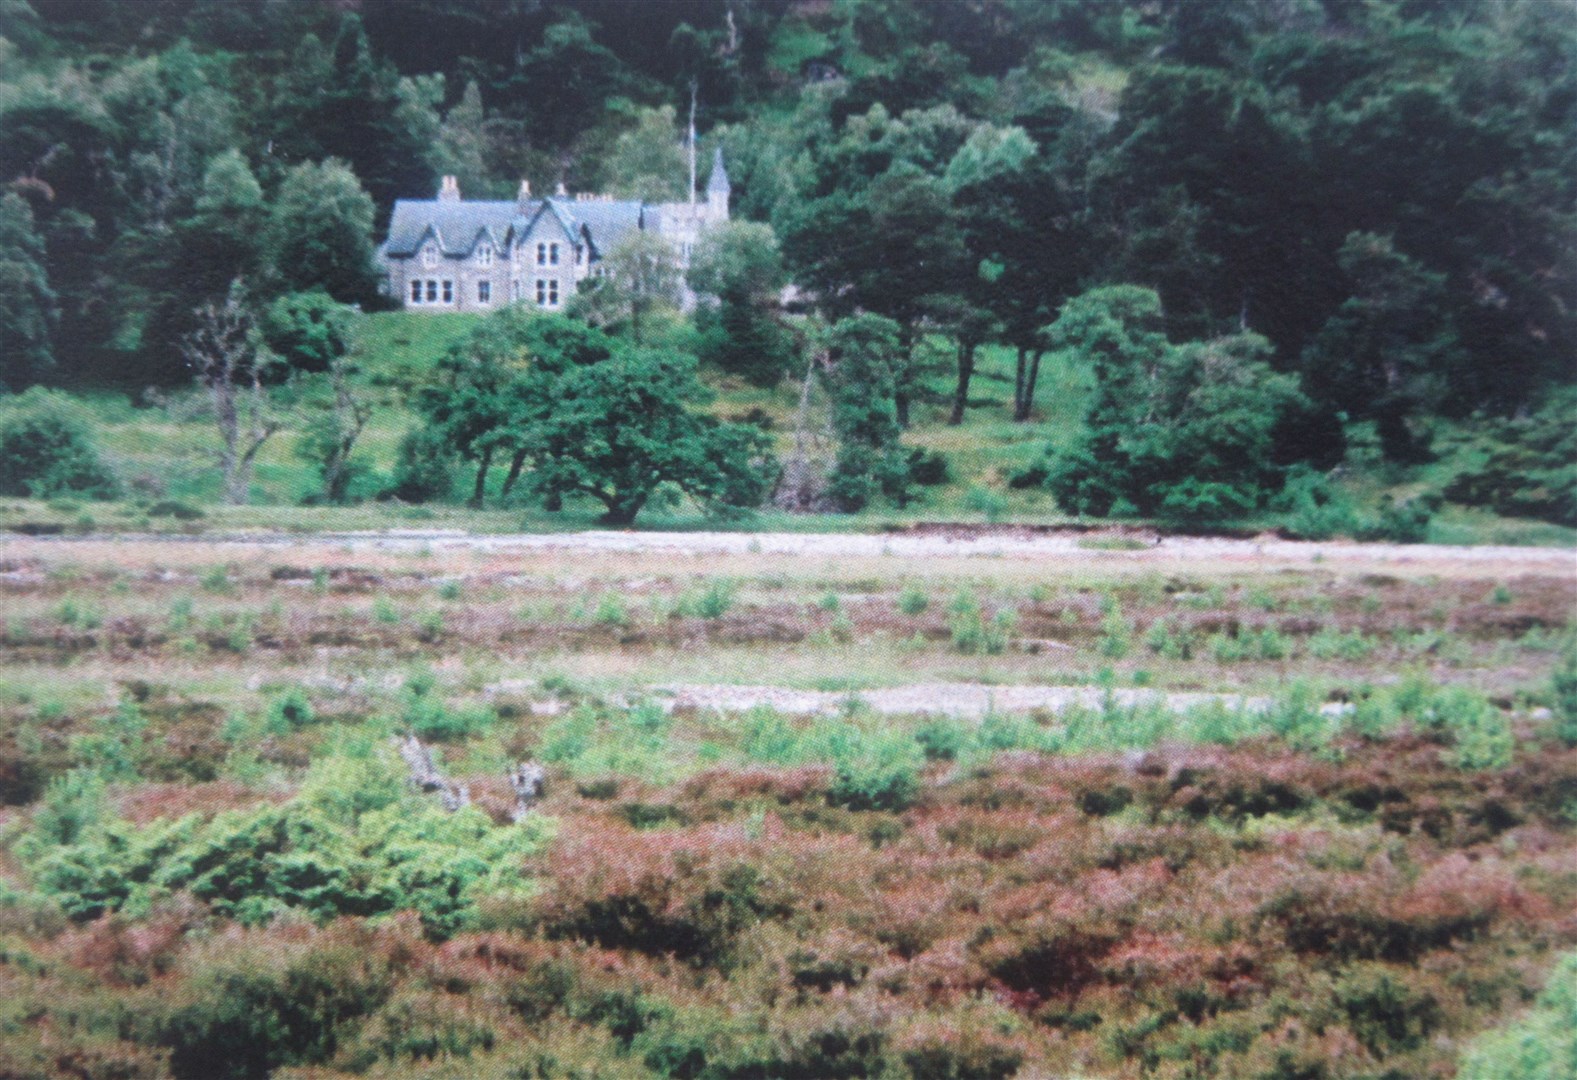 Scottish home: Glenfeshie Lodge in the early days of the Povlsen era